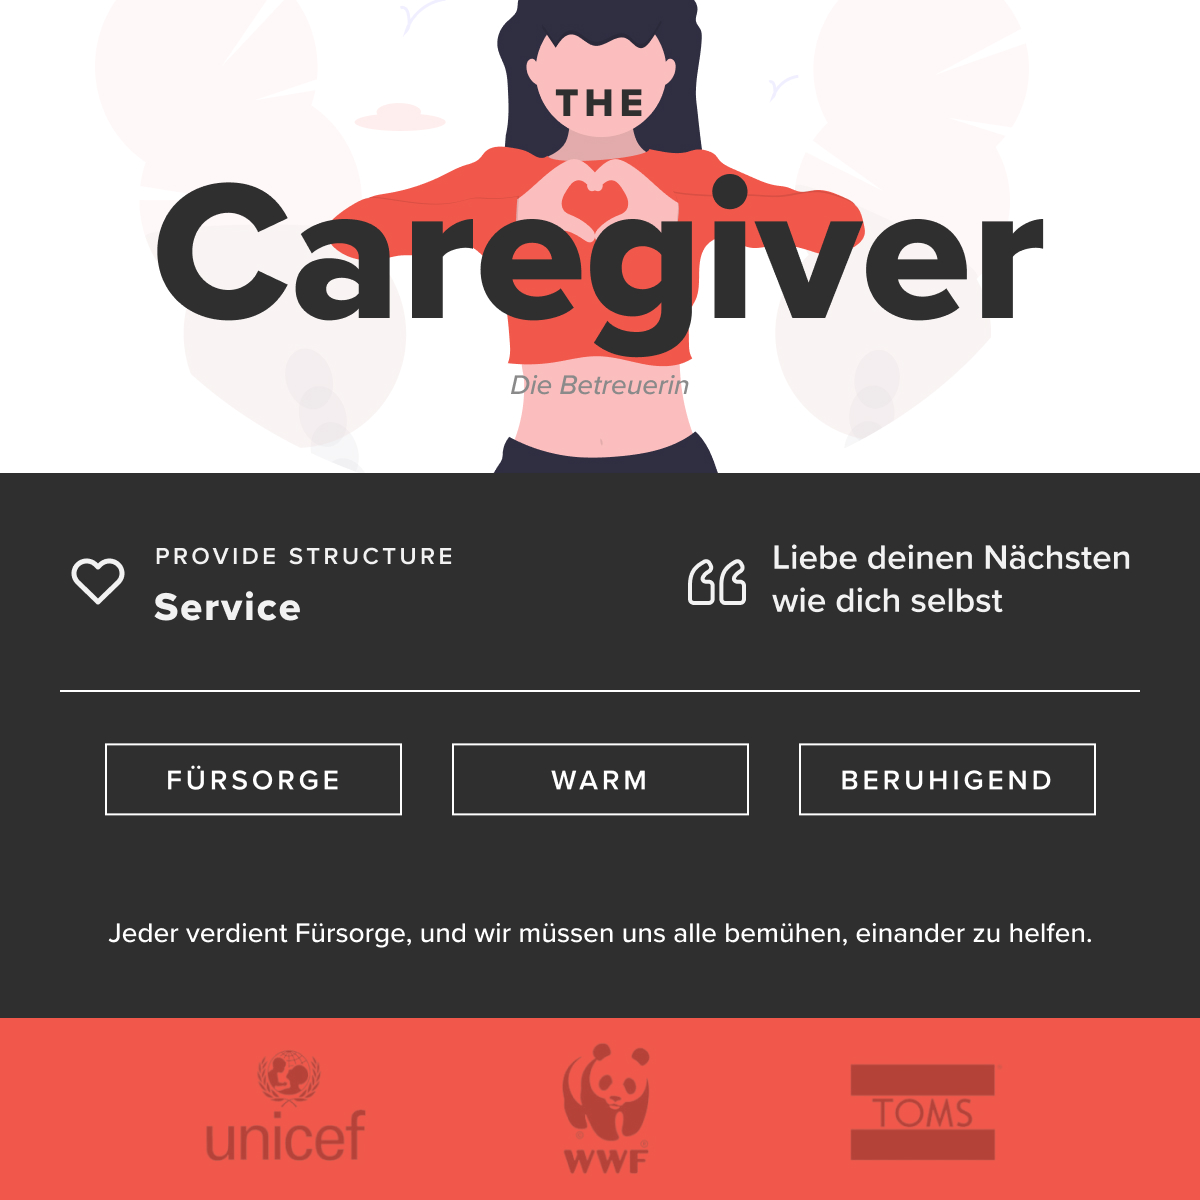 The caregiver is a website with an image of a woman holding a heart.